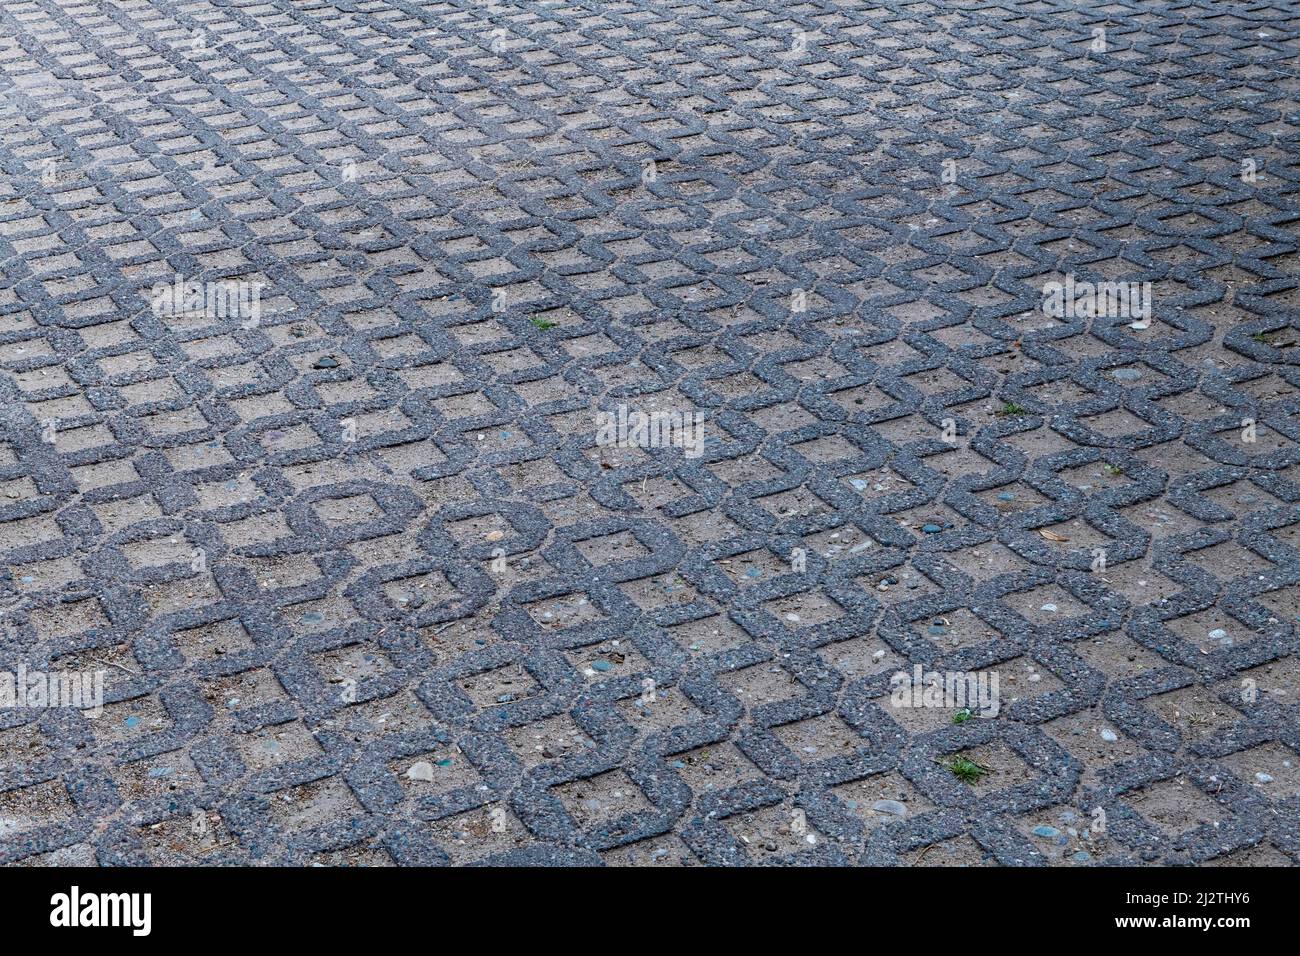 Permeable pavement on a residential city street allows stormwater runoff to filter through surface voids. Stock Photo